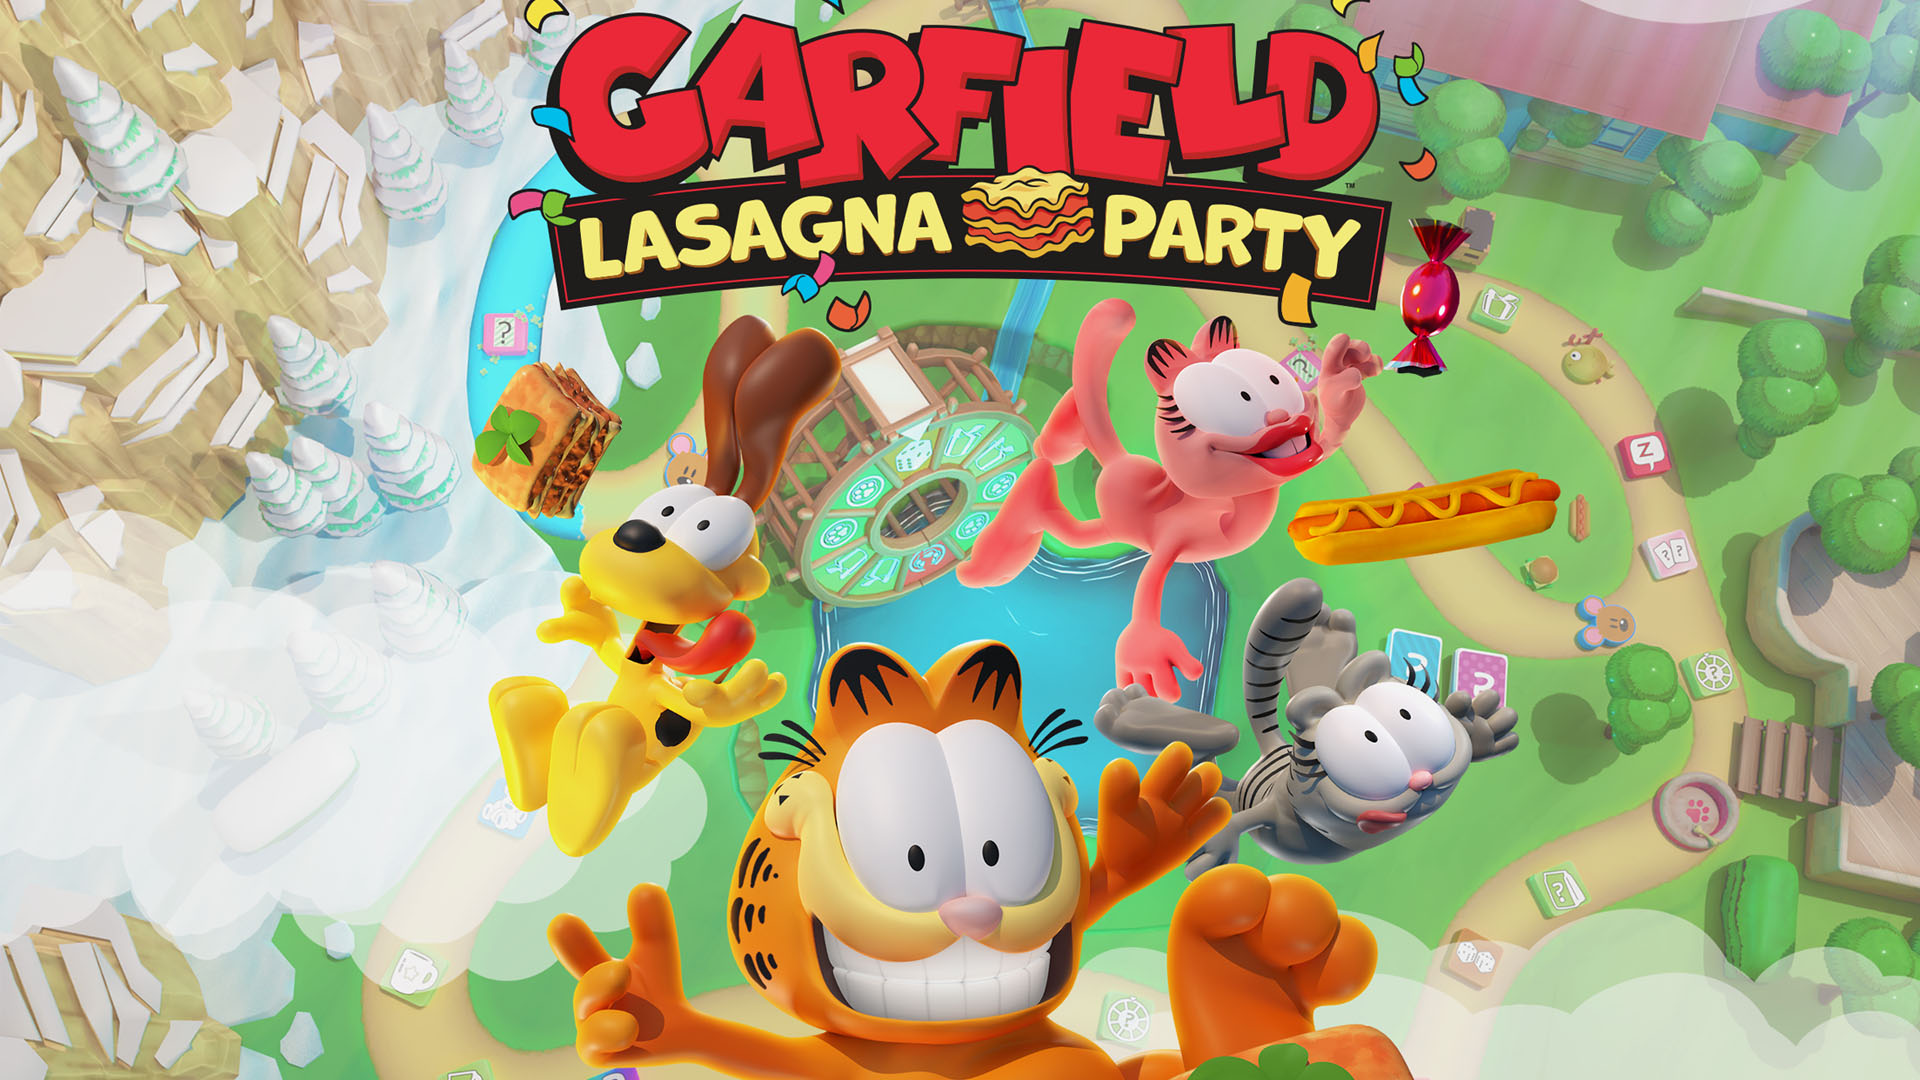 Garfield Lasagna Party announced for PC and consoles